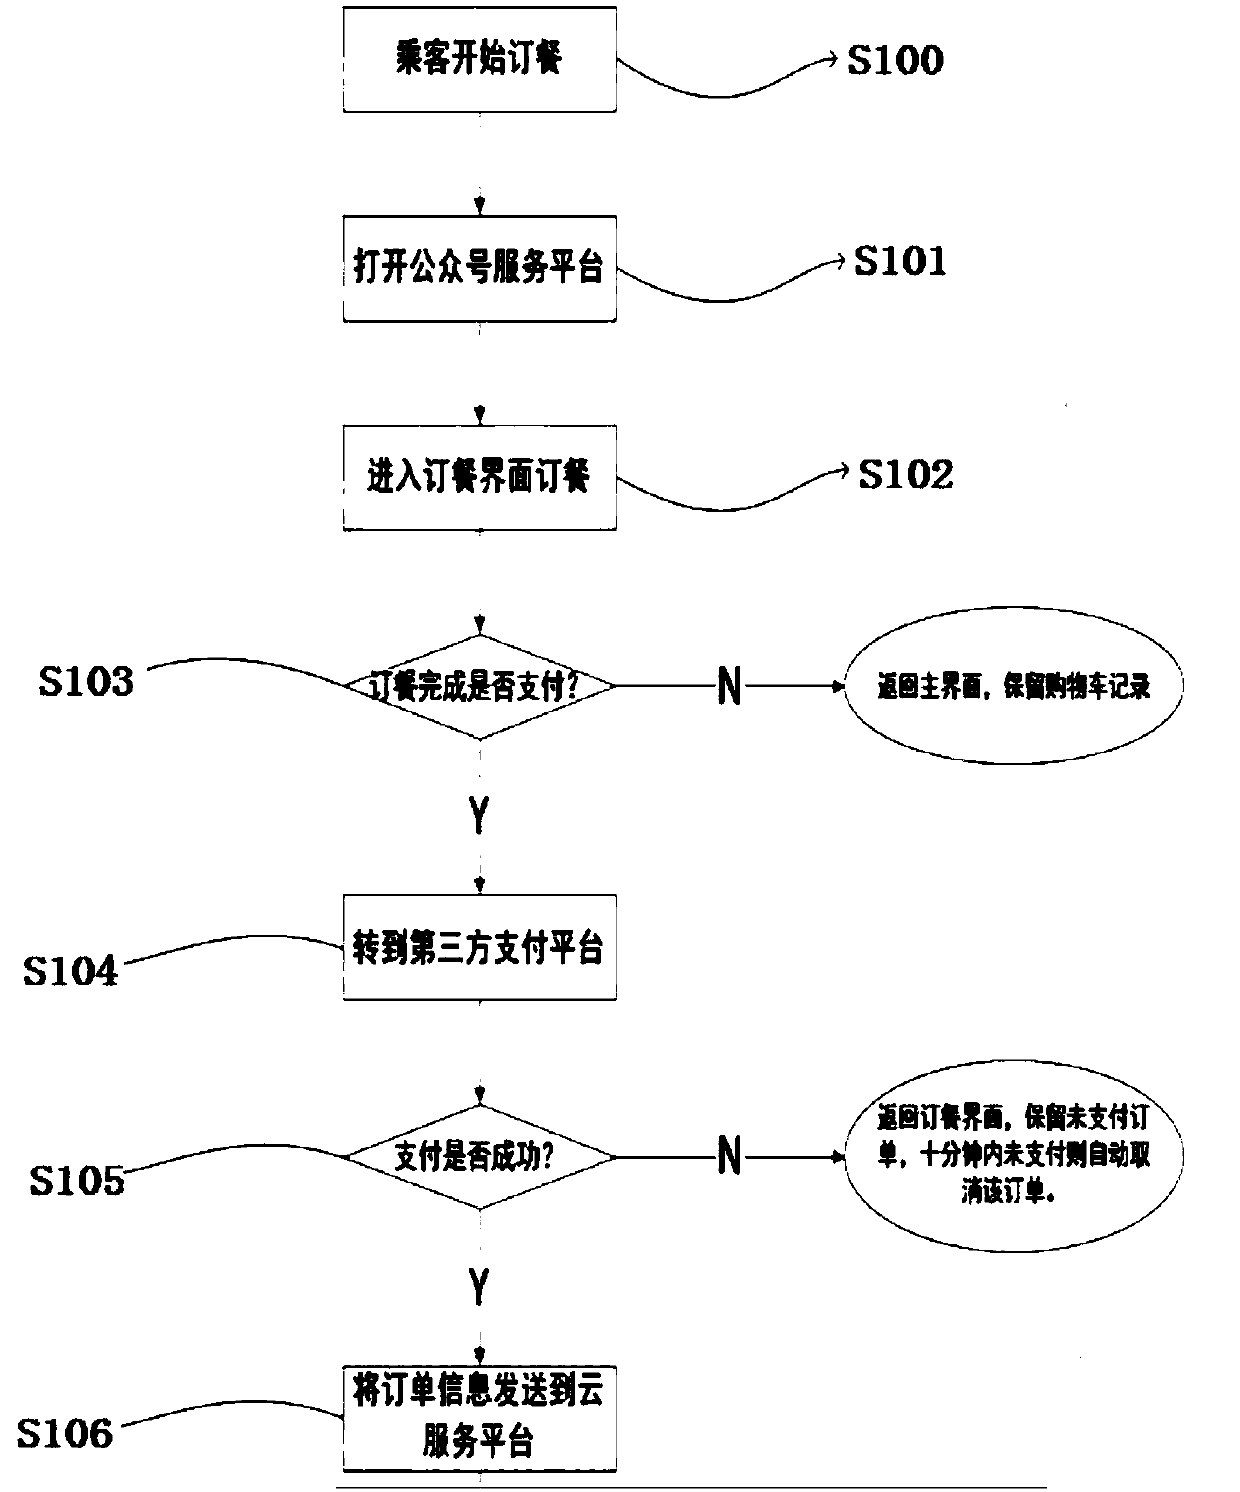 Network self-service meal ordering and taking system and method orienting railway passengers